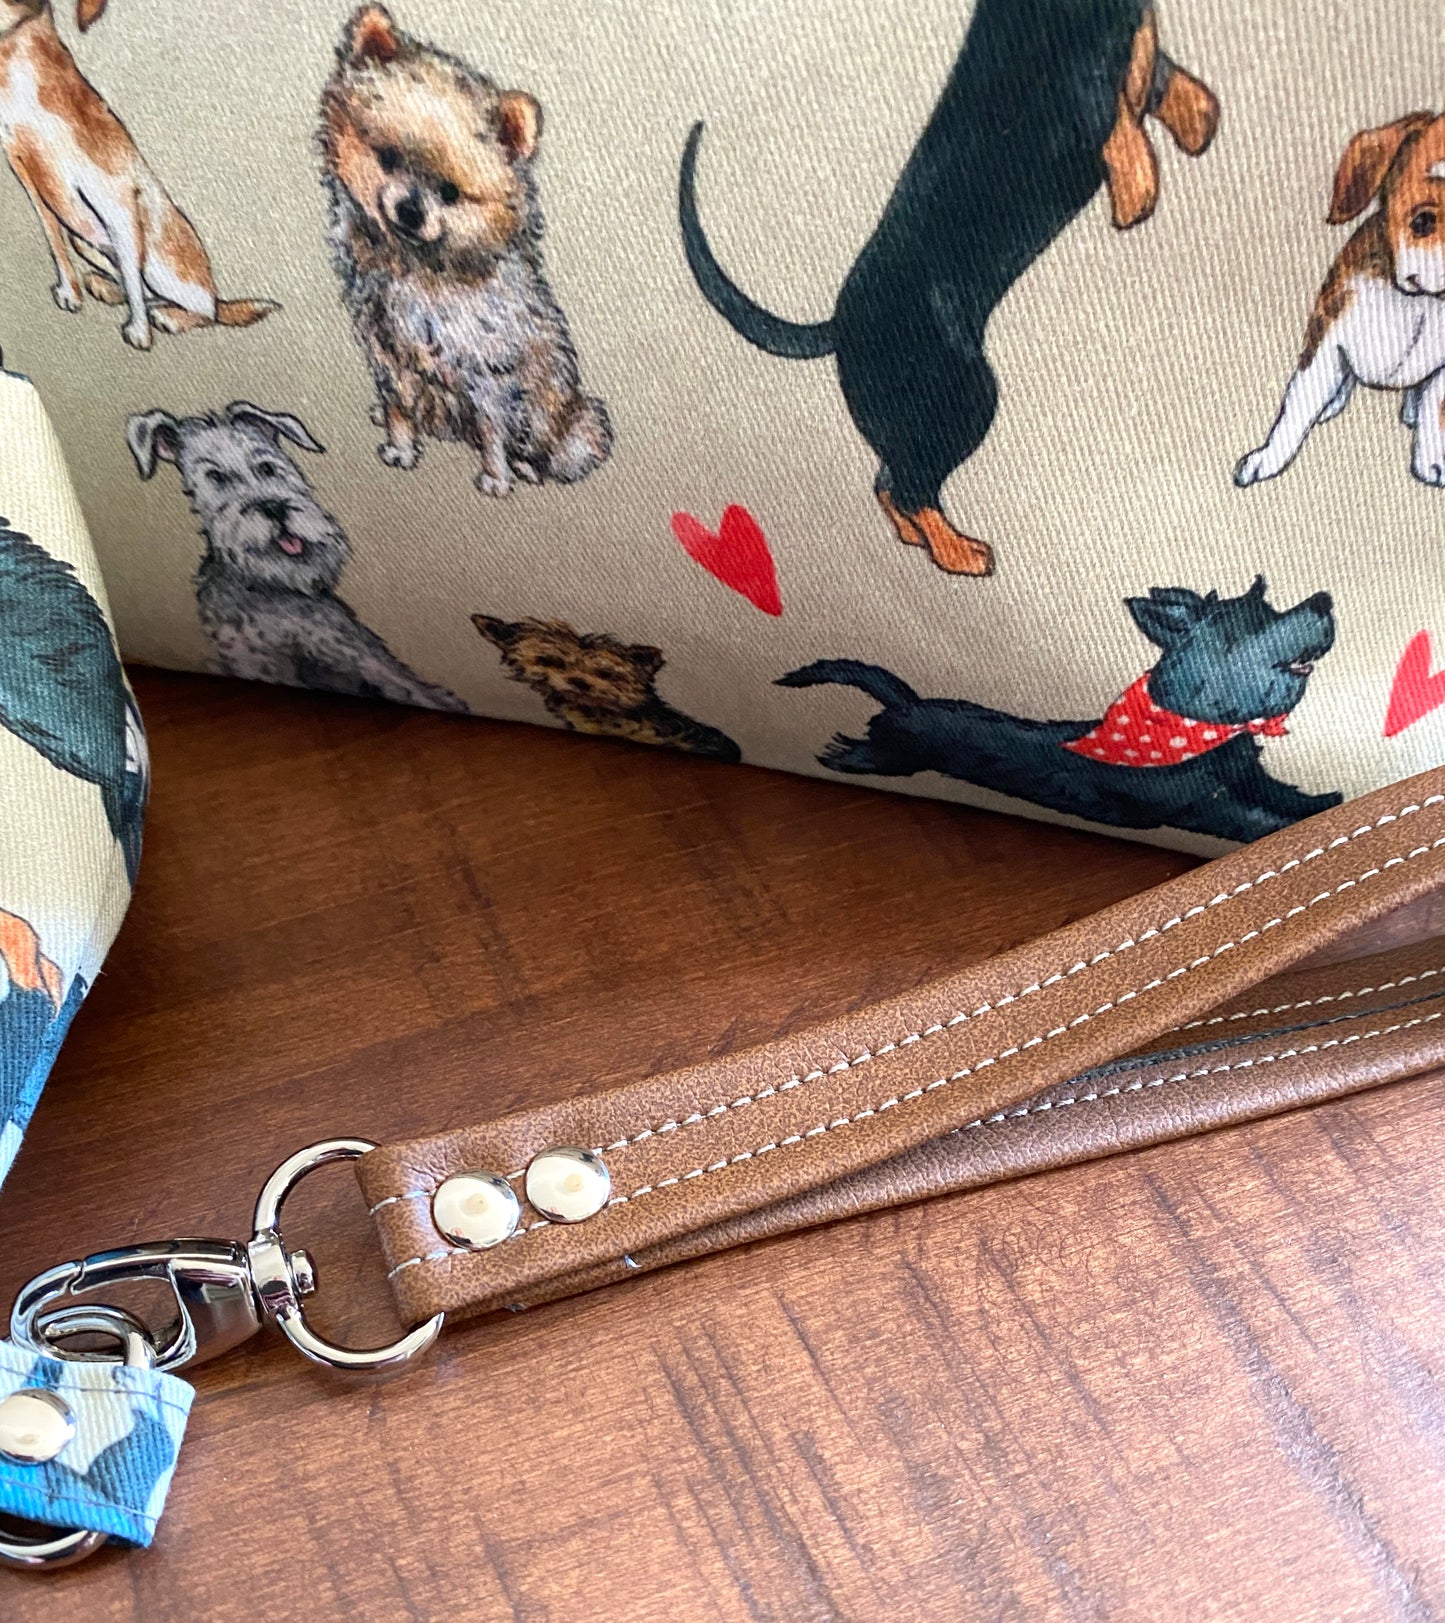 Zipper Pouch - The PB+J - SMALL DOGS Deluxe Wristlet